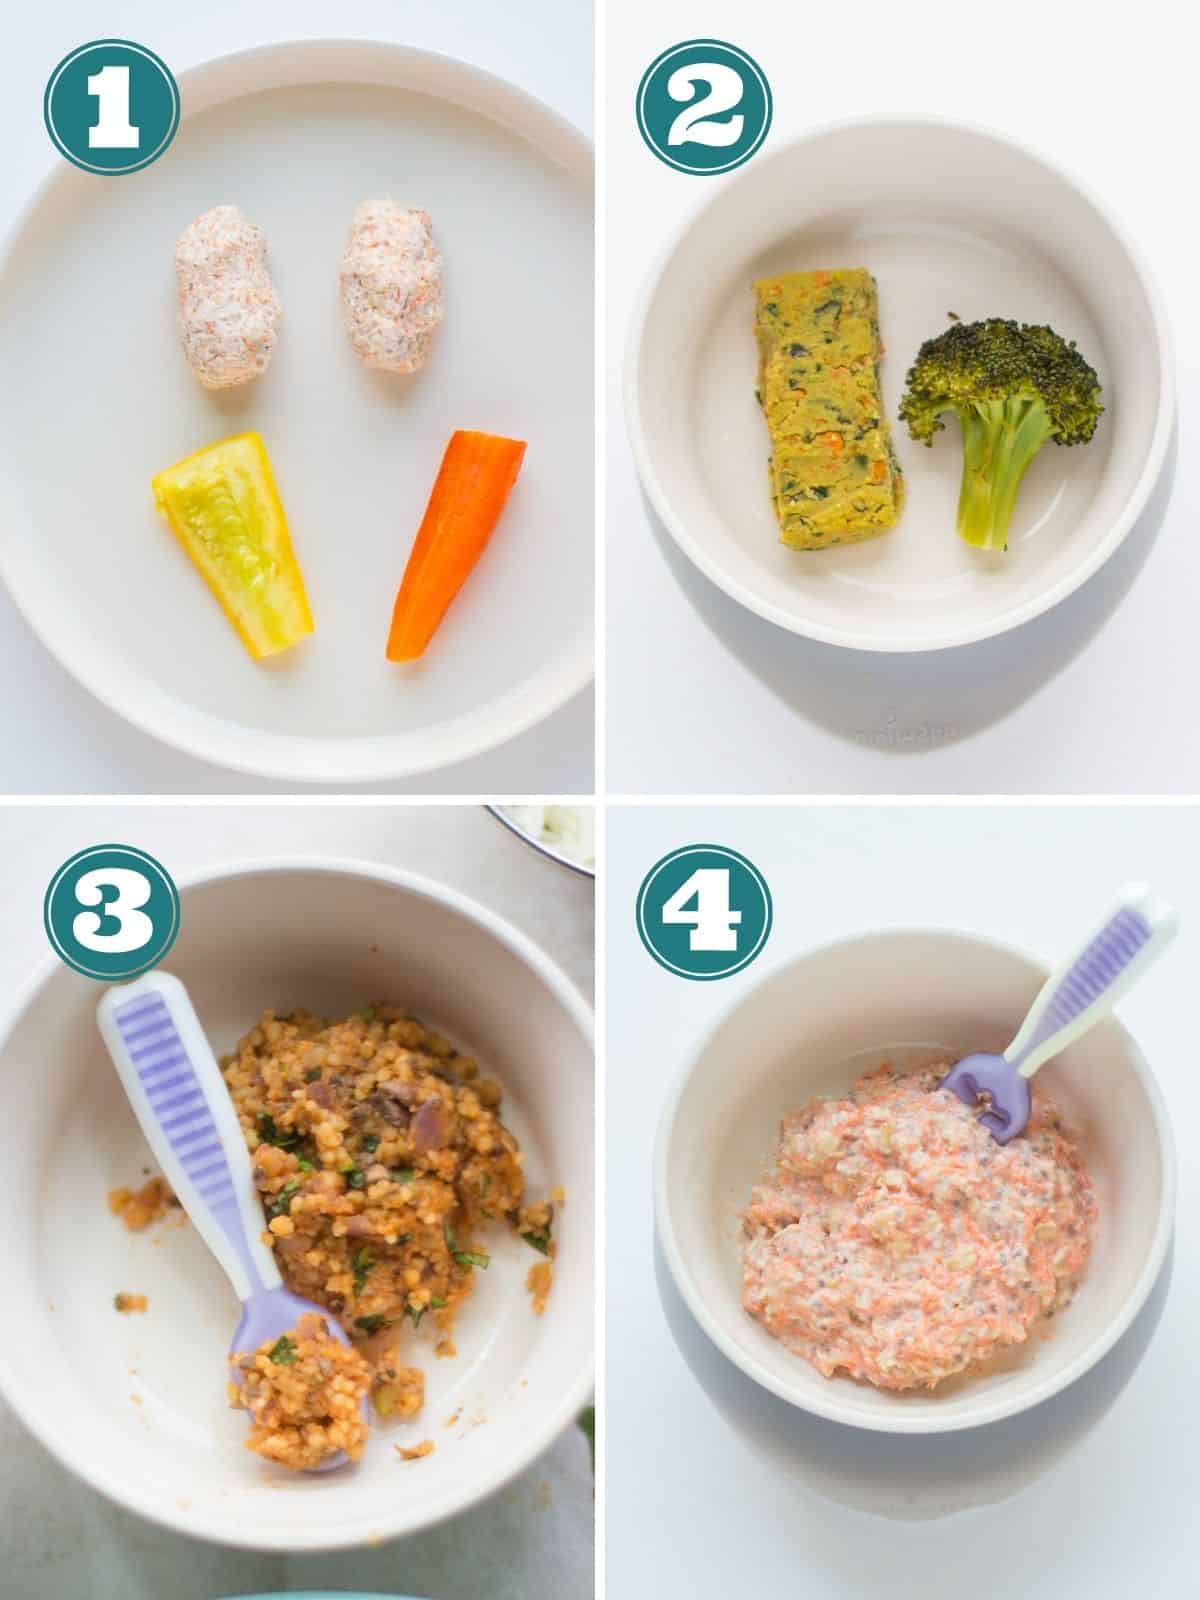 Carrot Recipes for Baby - MJ and Hungryman